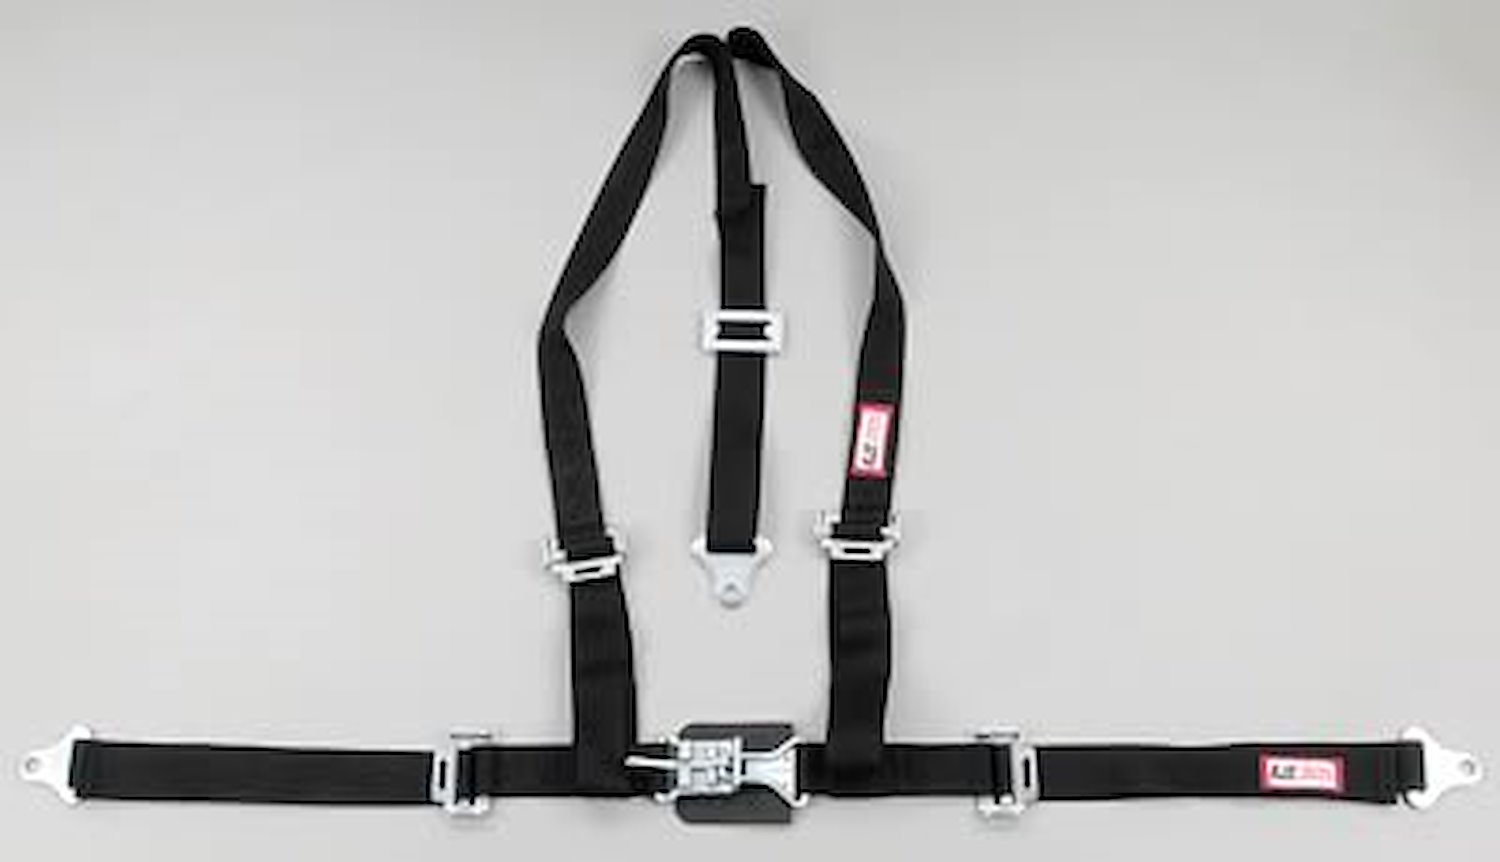 NON-SFI L&L HARNESS 2 PULL DOWN Lap Belt w/Adjuster SNAP 2 S.H. Y FLOOR Mount WRAP/SNAP RED